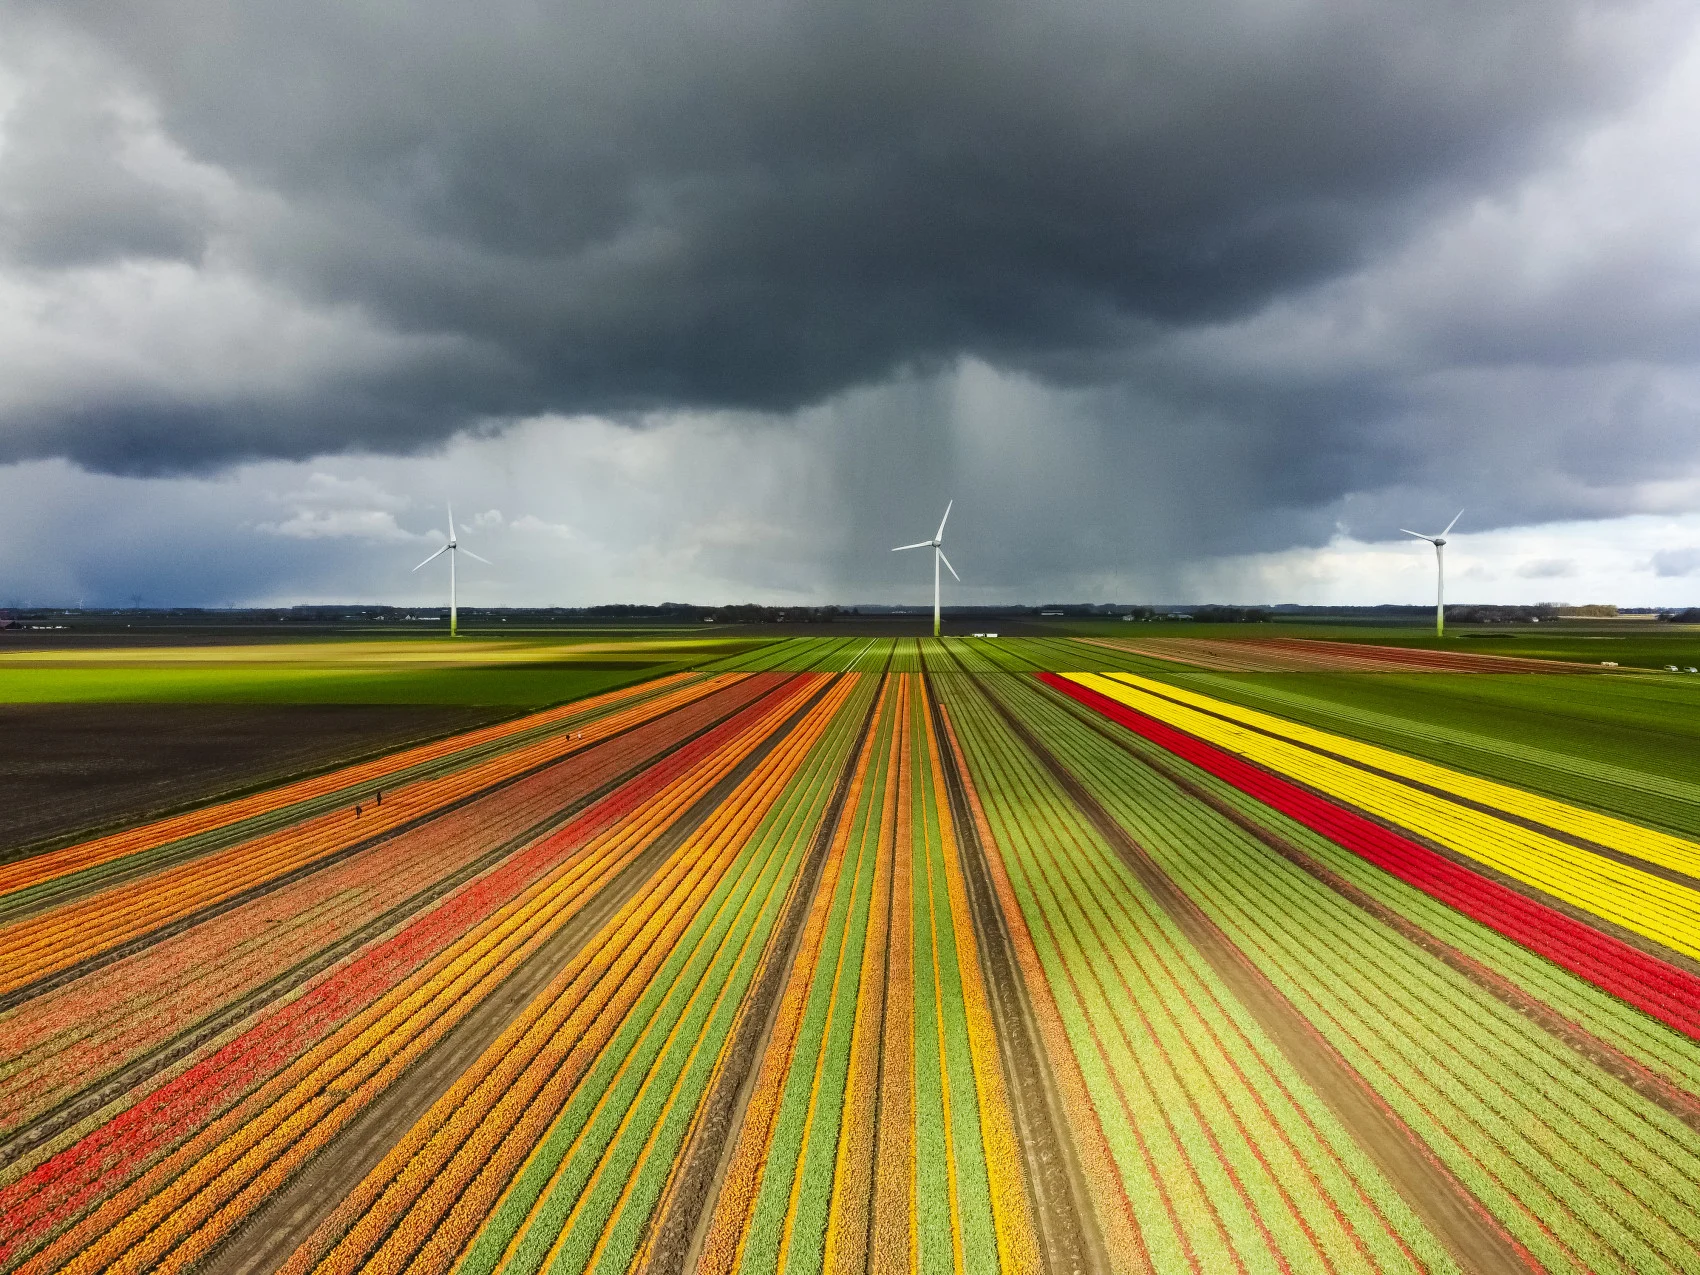 Blossoming yellow tulips in a field during a stormy spring afternoon with incoming hail storm clouds over the horizon. The tulip field has multiple colours and wind turbines in the background. Drone point of view. (Sjo/ E+/ Getty Images)